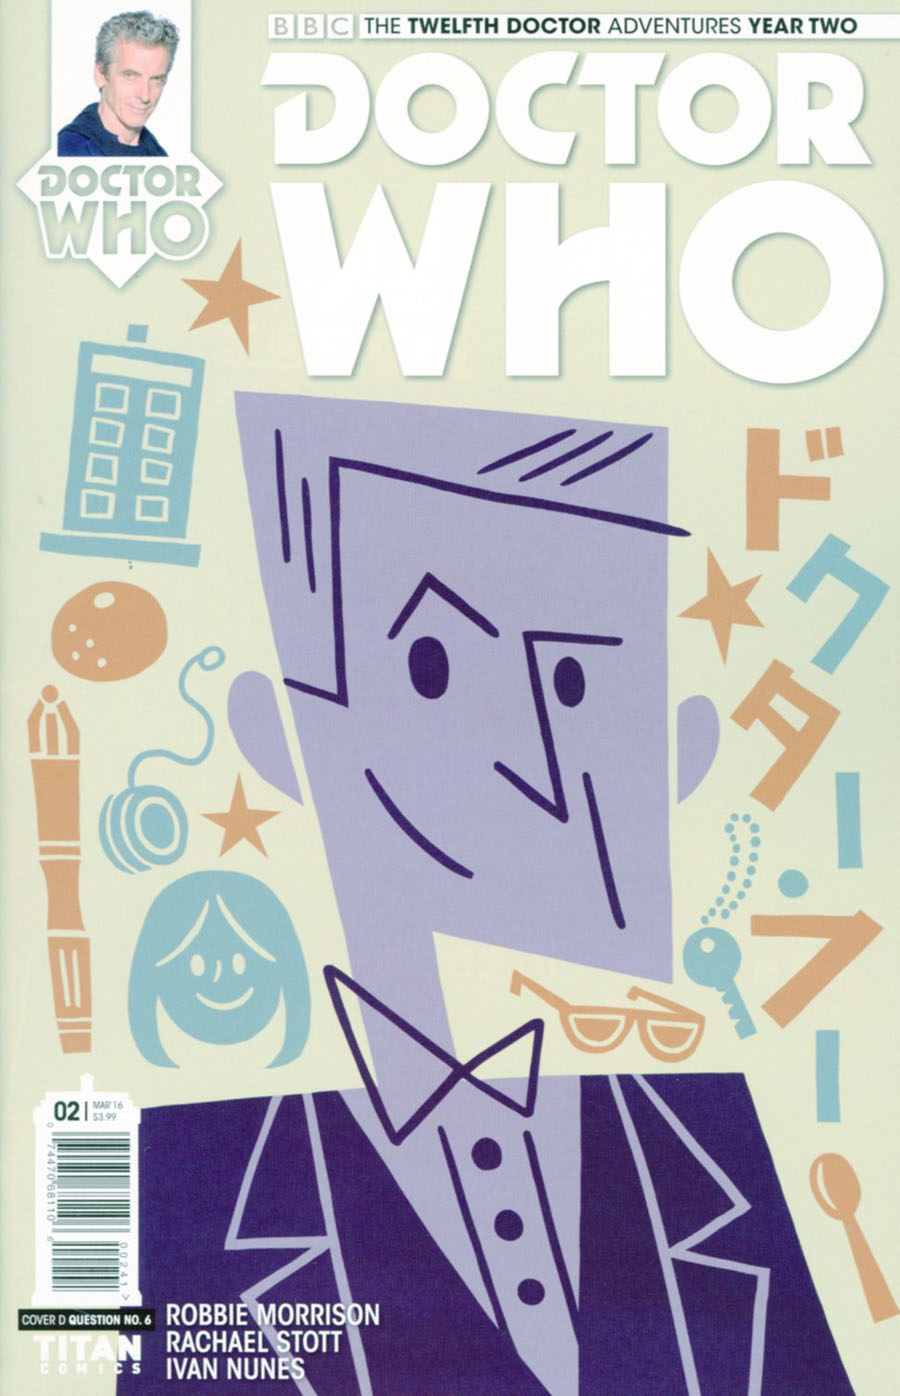 Doctor Who 12th Doctor Year Two #2 Cover C Variant Question No 6 Cover